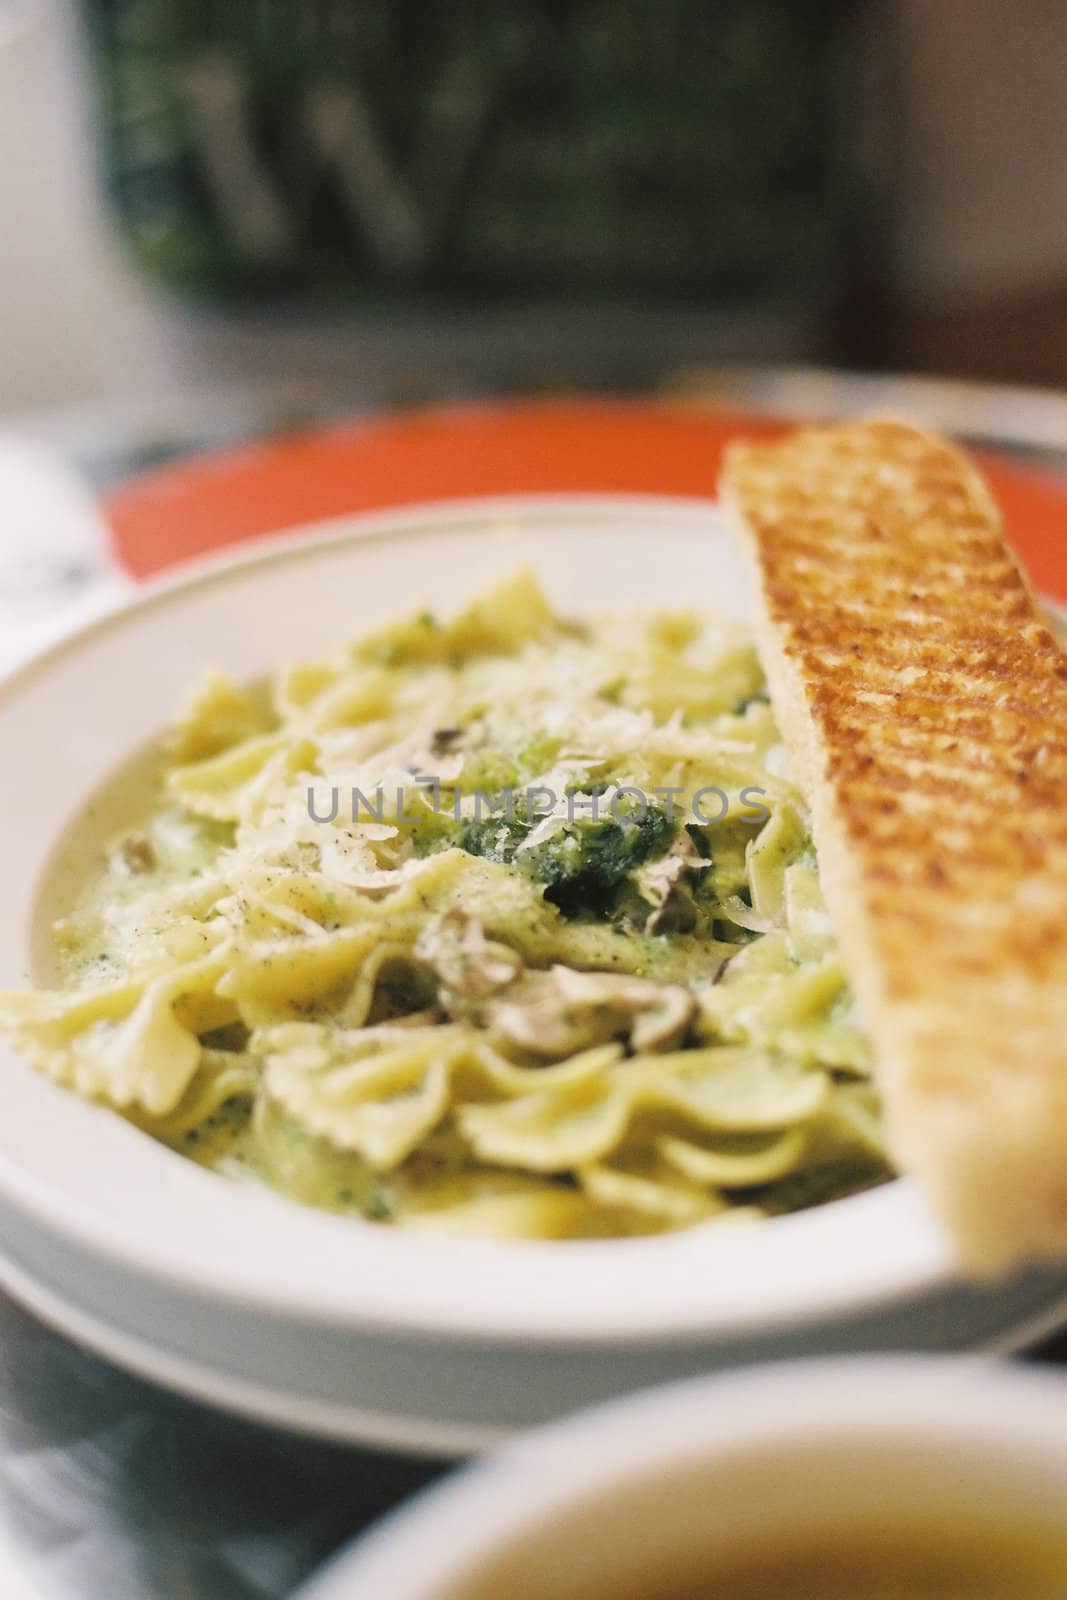 Delicious pasta (Farfalla - butterfly), in cream sauce with garlic, herbs and cheese.